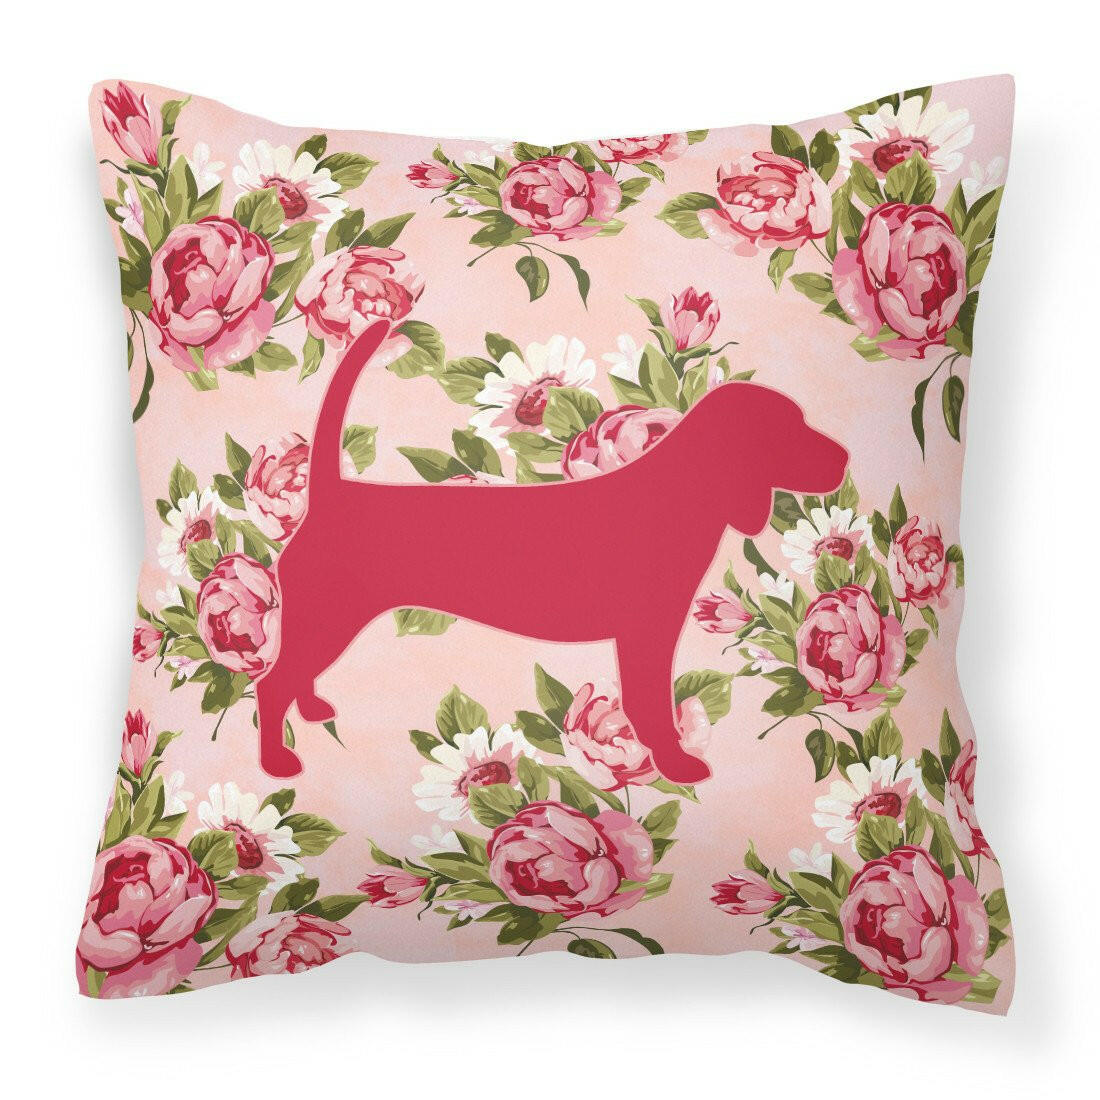 Beagle Shabby Chic Pink Roses  Fabric Decorative Pillow BB1087-RS-PK-PW1414 - the-store.com